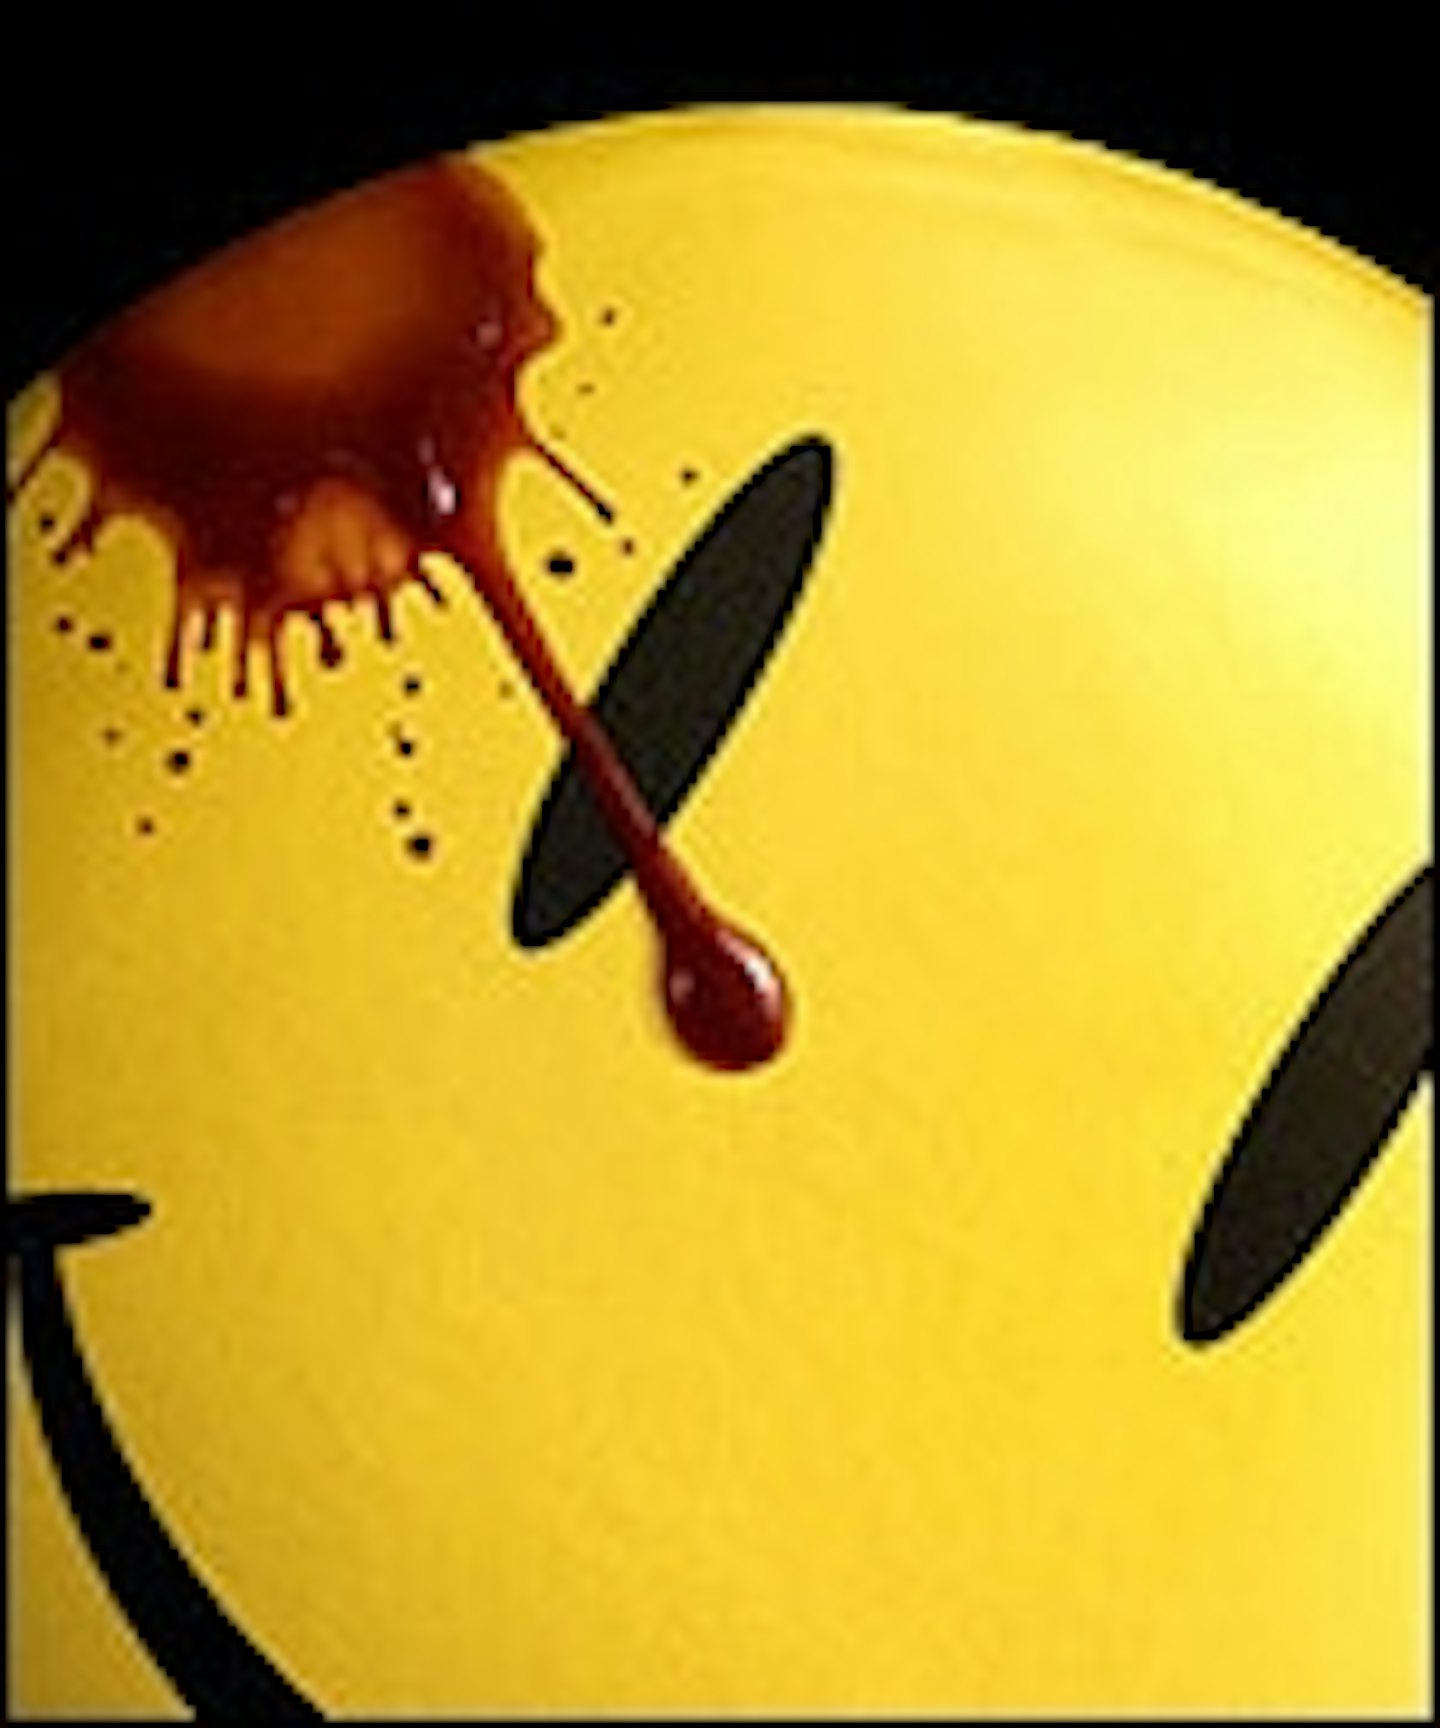 Ready For Watchmen 2?